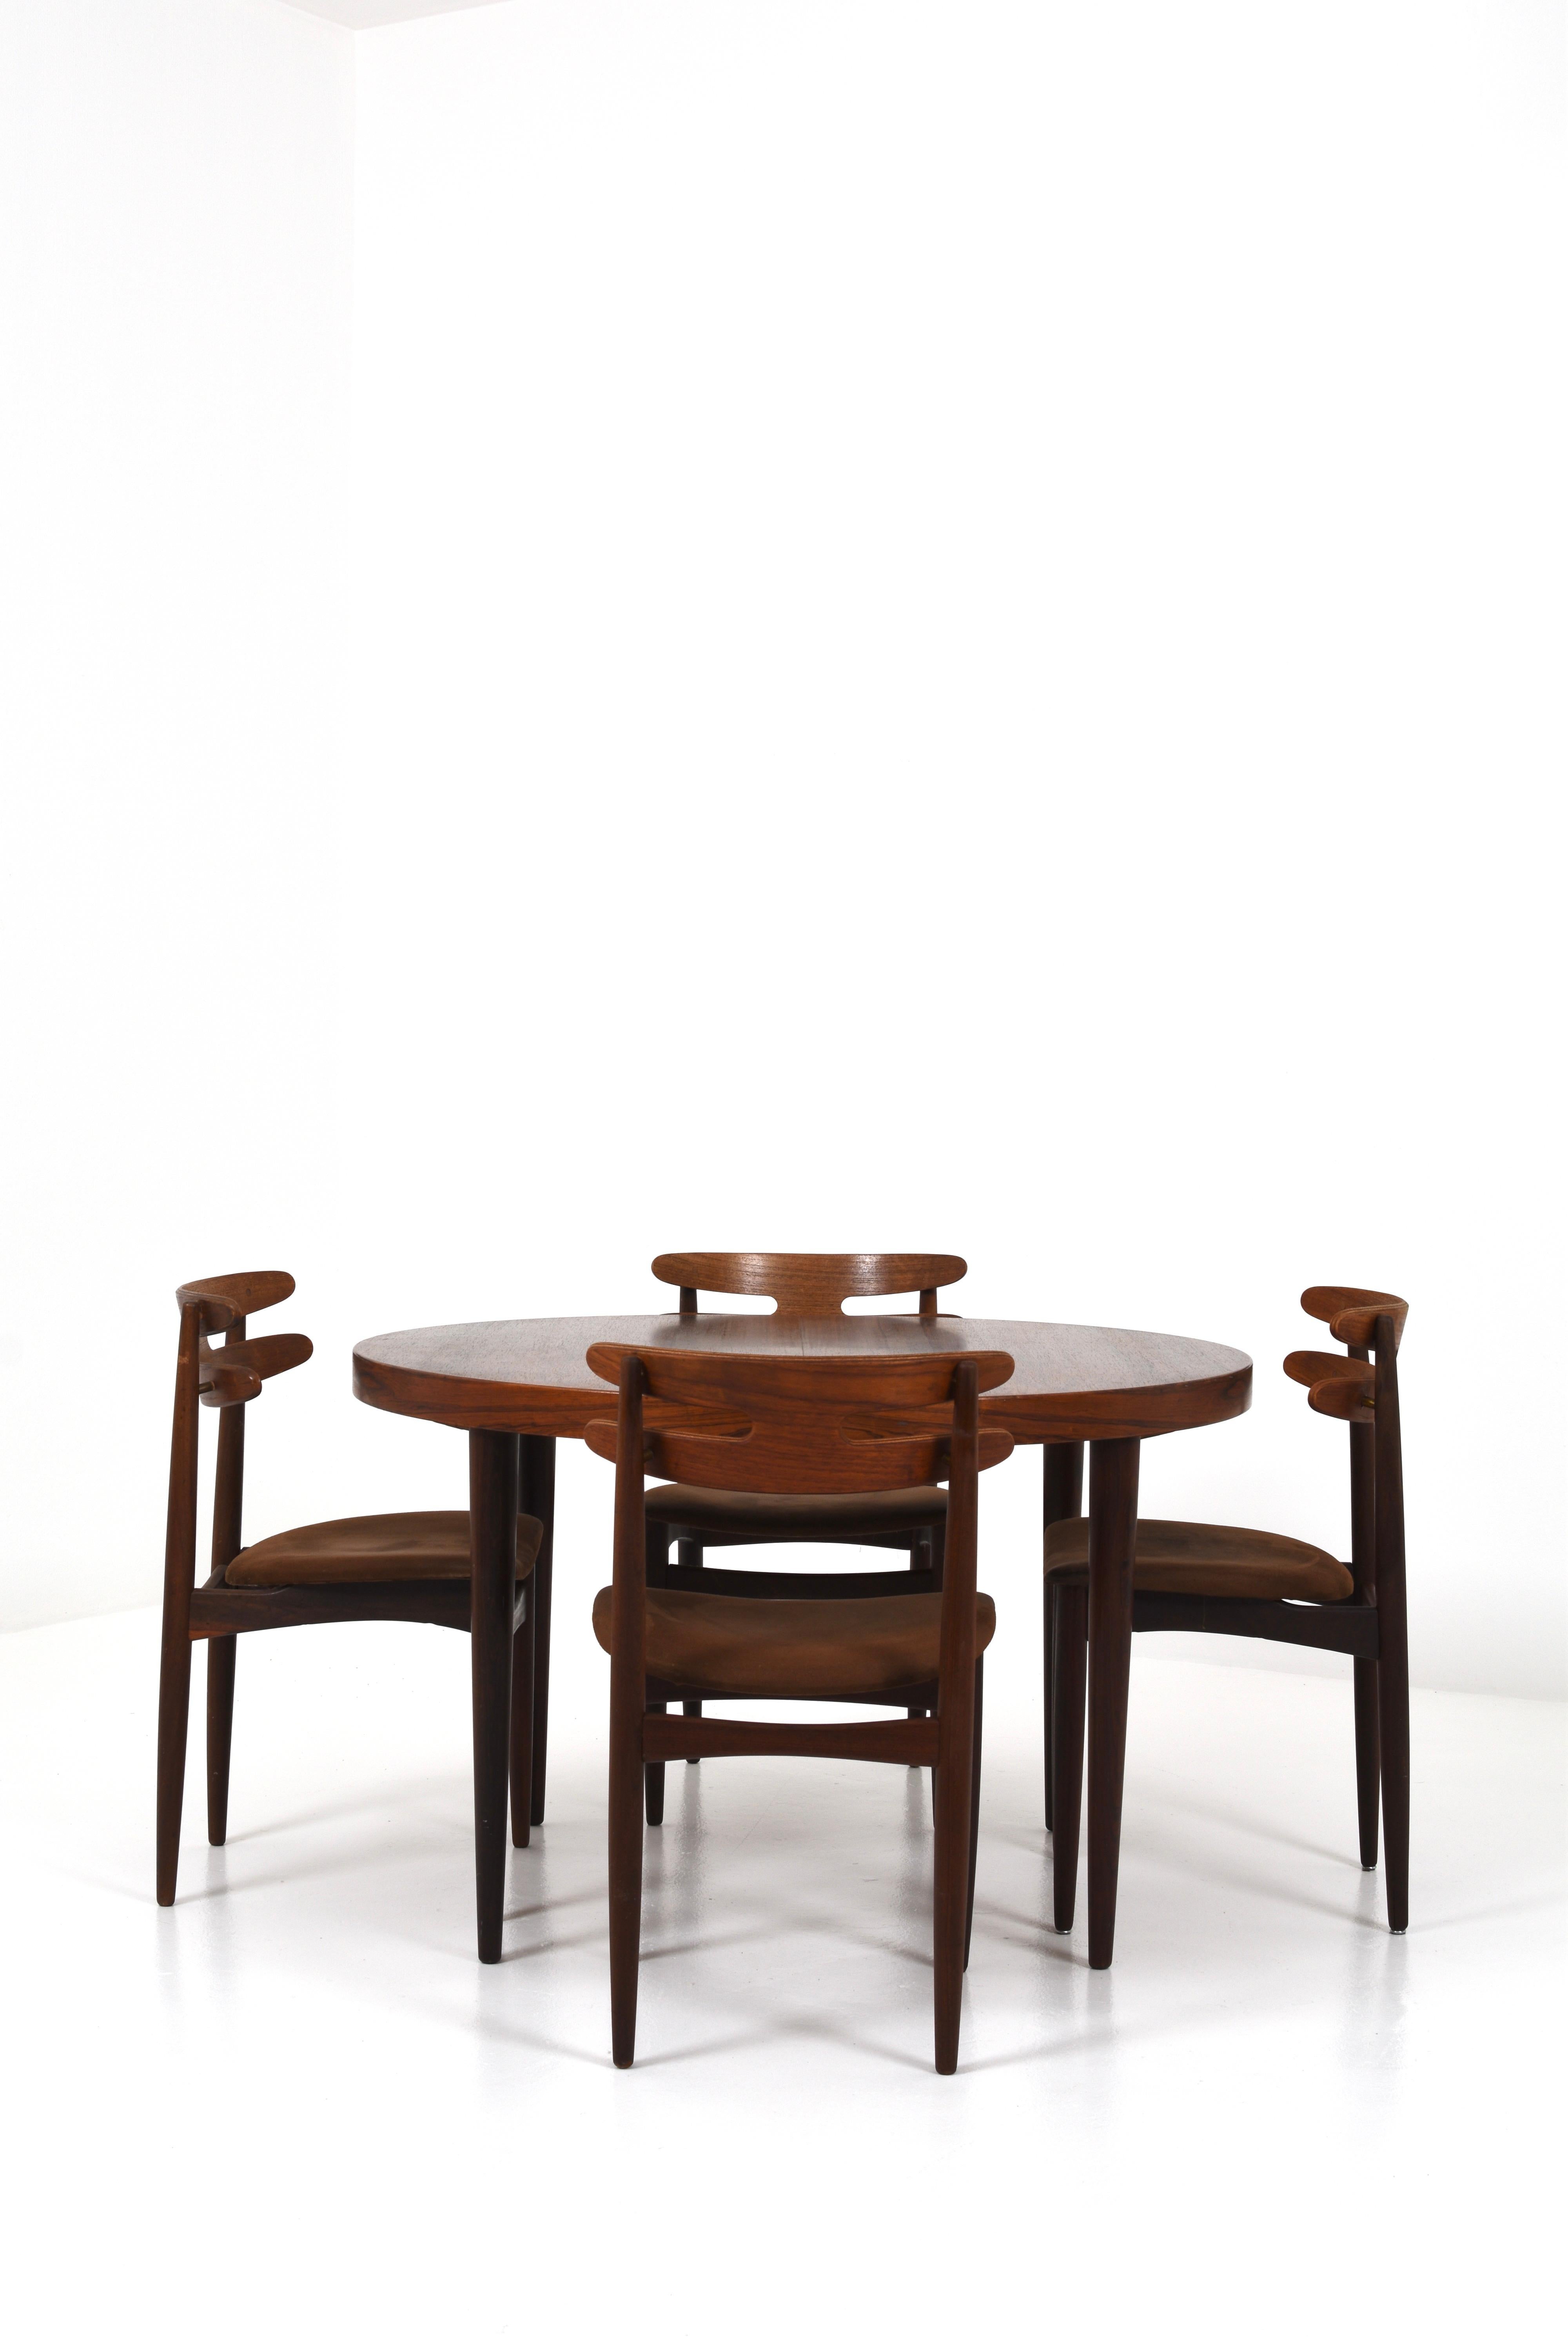 This elegant dining table is a timeless creation by Danish furniture designer Kai Kristiansen and manufactured by the renowned Feldballes Møbelfabrik in Denmark during the 1960s.

Kai Kristiansen is known for his ability to create furniture that is